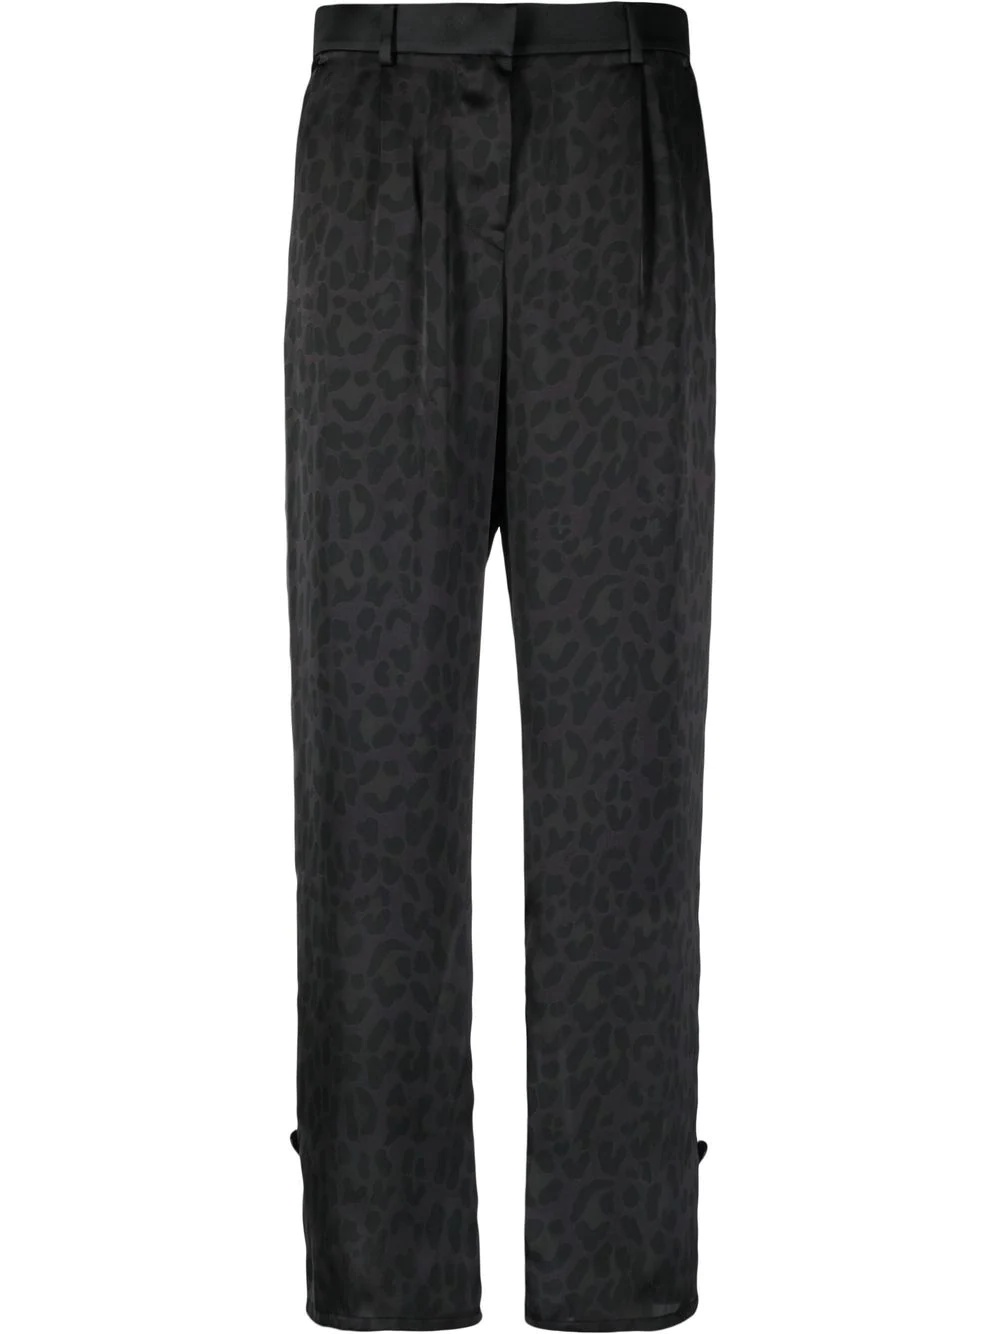 high-waisted patterned trousers - 1